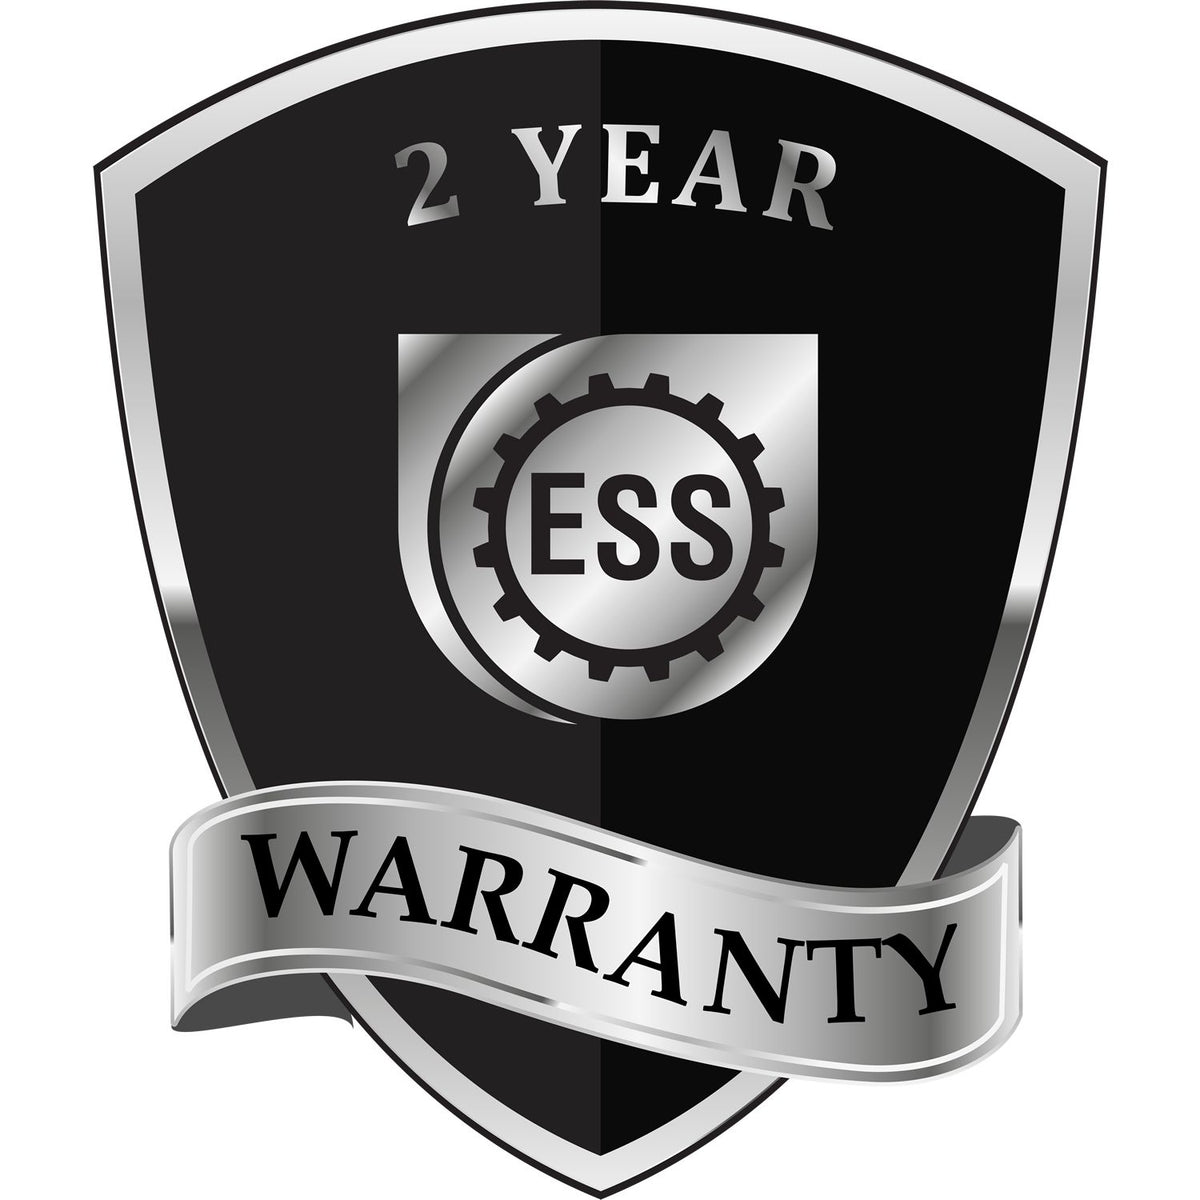 A black and silver badge or emblem showing warranty information for the Handheld Vermont Professional Geologist Embosser